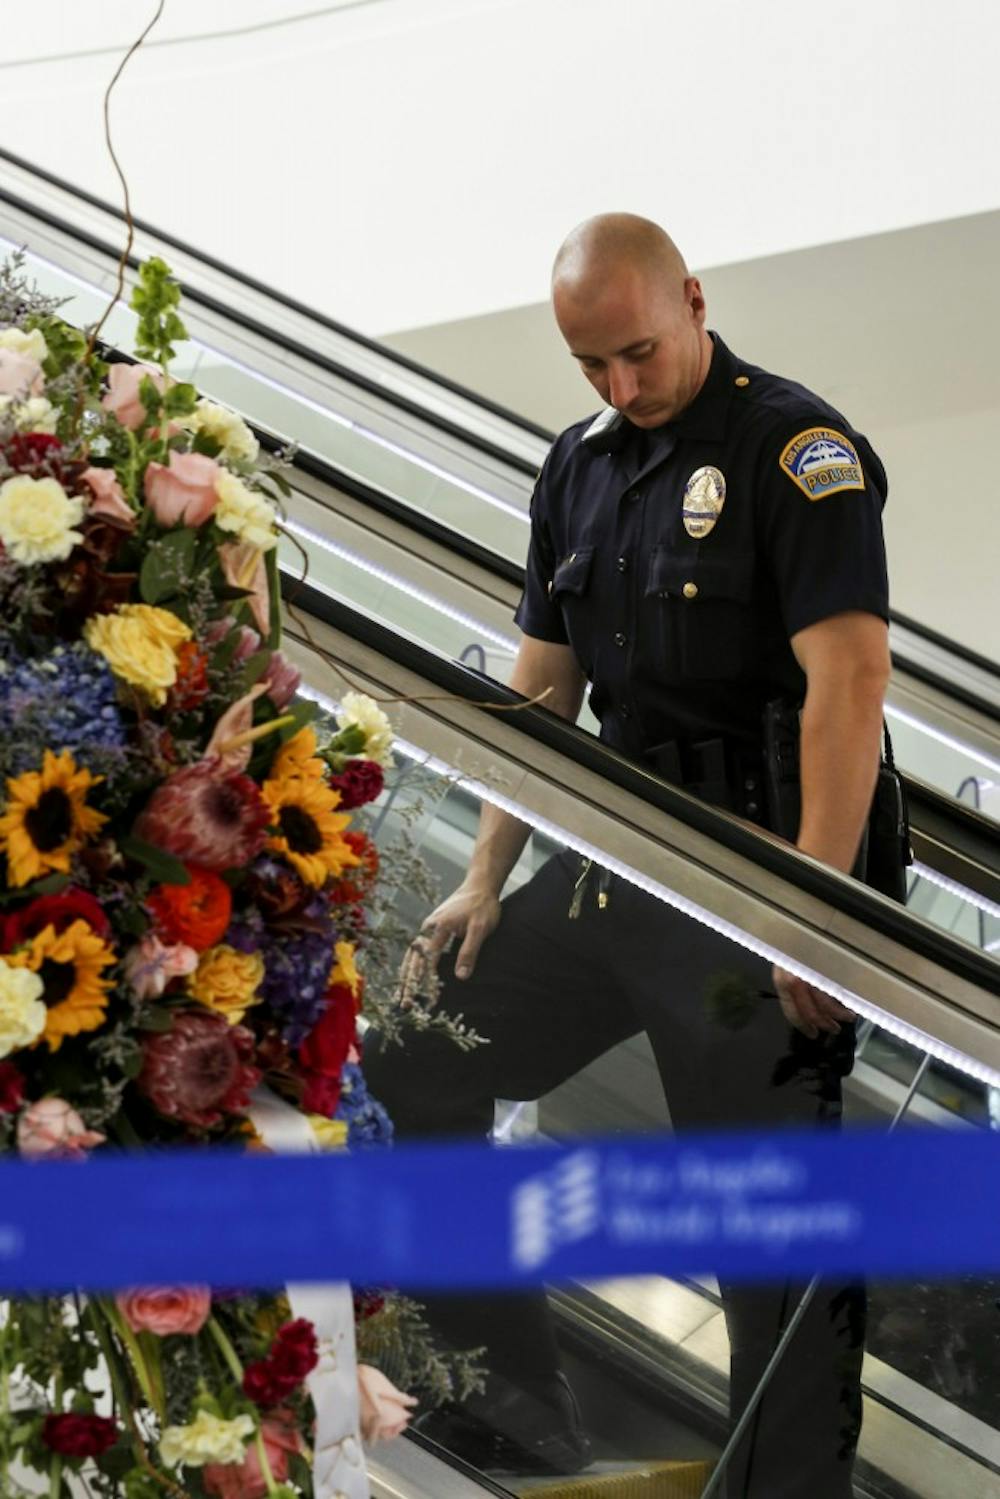 An Los Angeles Airport Police officer passes by a flower memorial in terminal three for slain TSA officer Gerardo Hernandez at LAX on November 3, 2013, in Los Angeles, California. (Jay L. Clendenin/Los Angeles Times/MCT)